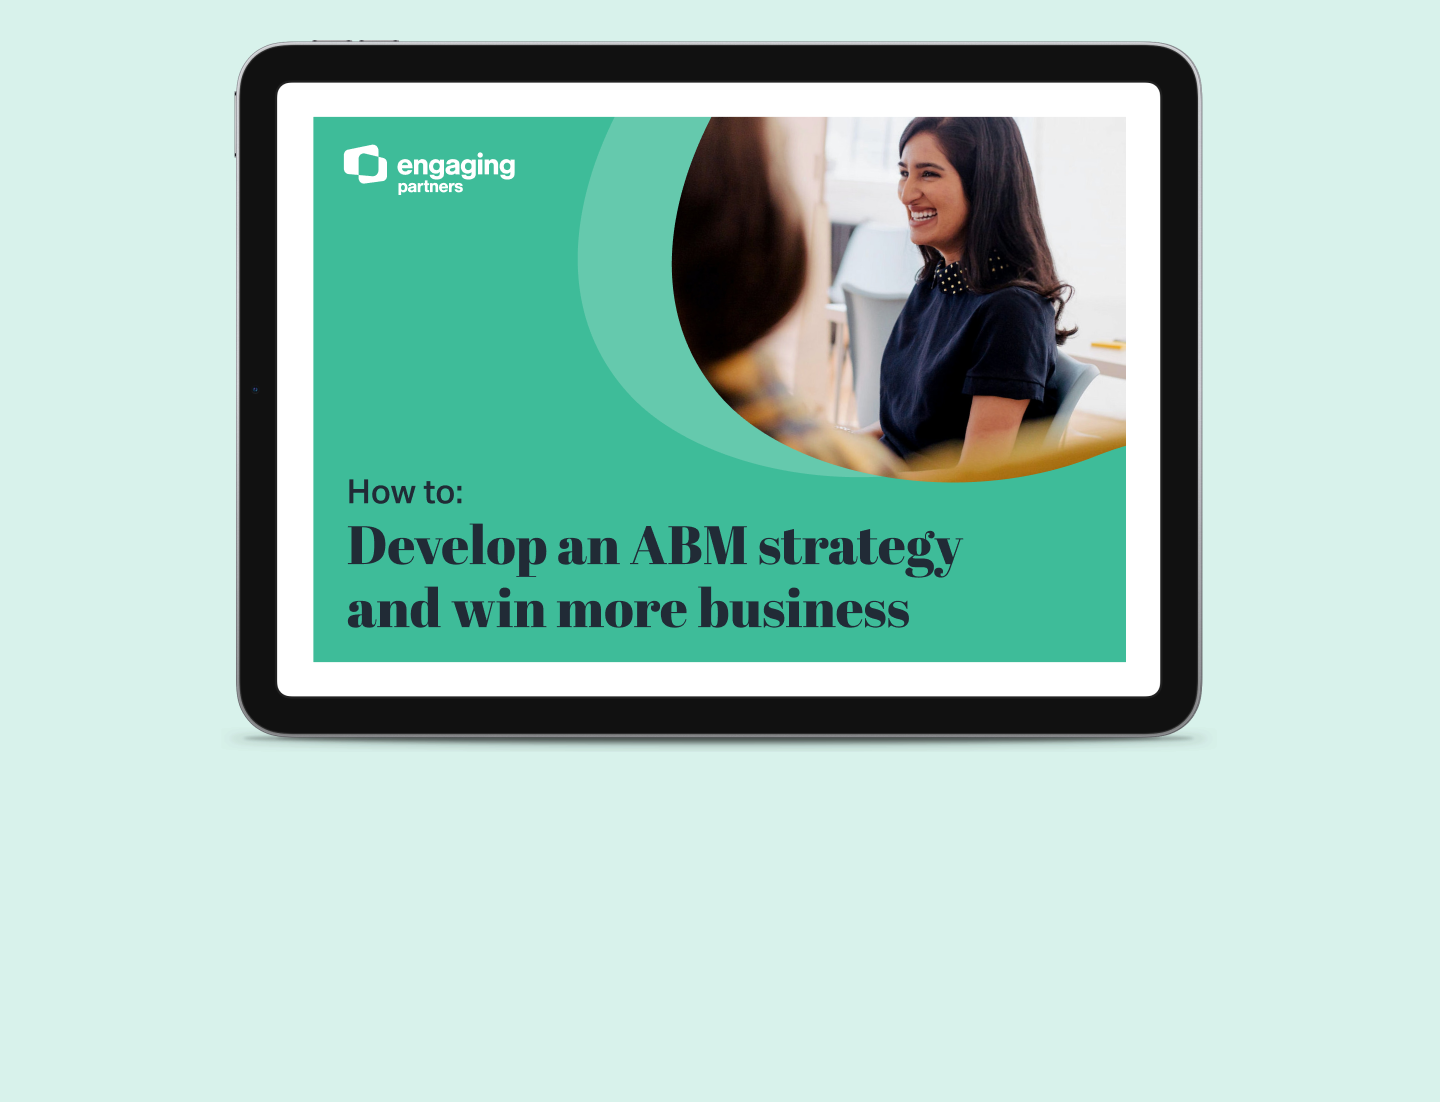 How to develop an ABM strategy